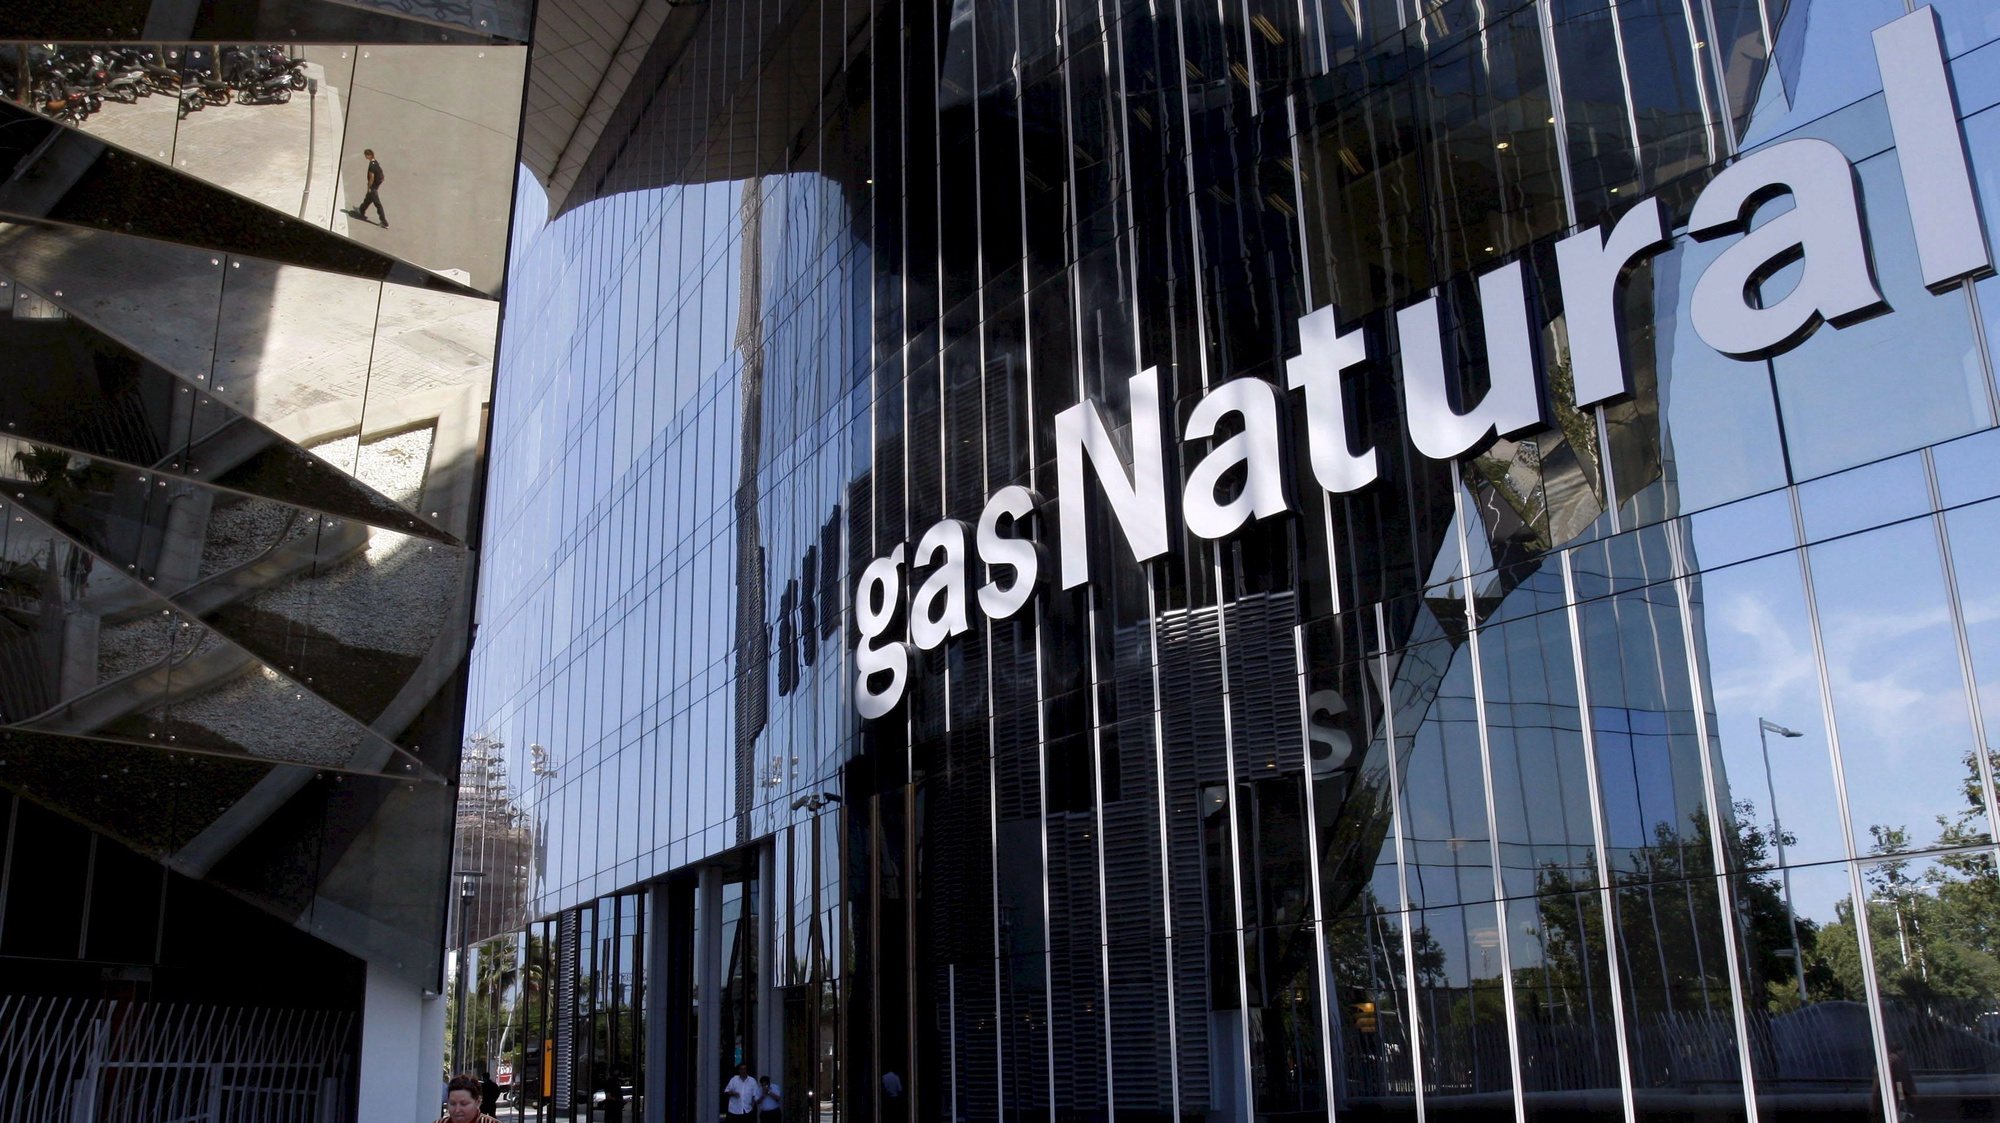 epa01427284 A view of the exterior of Gas Natural headquarters in Barcelona, northeastern Spain, 30 July 2008. Gas Natural, which is Spain&#039;s largest gas supplier, is to offer a bid of 18,33 per share in its aim to take control of Spain&#039;s electricity company Union Fenosa. On the other hand, Gas Natural board of directors is having a meeting on 30 July to approve the purchase of a 9,99 per cent of construction company ACS in order to observe the energy sector legislation. ACS is an investor of Union Fenosa.  EPA/TONI ALBIR